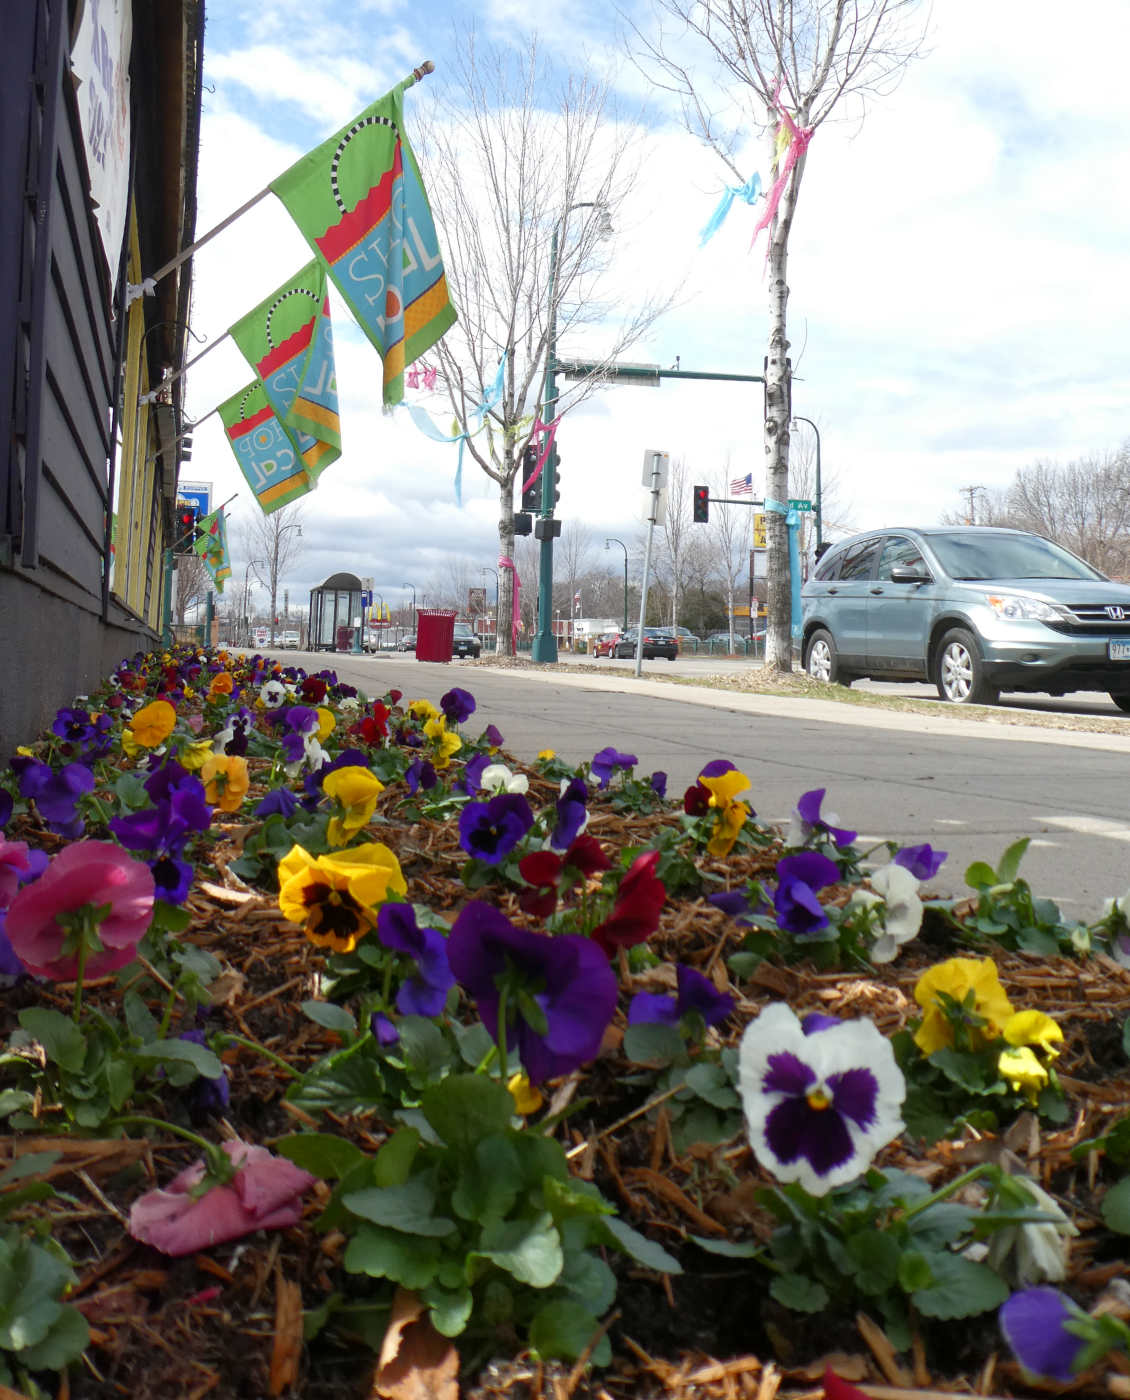 Bed of multi-colored pansies in a bed along sidewalk and streetscape with flags overhead and pink and blue ribbons hang overhead in trees